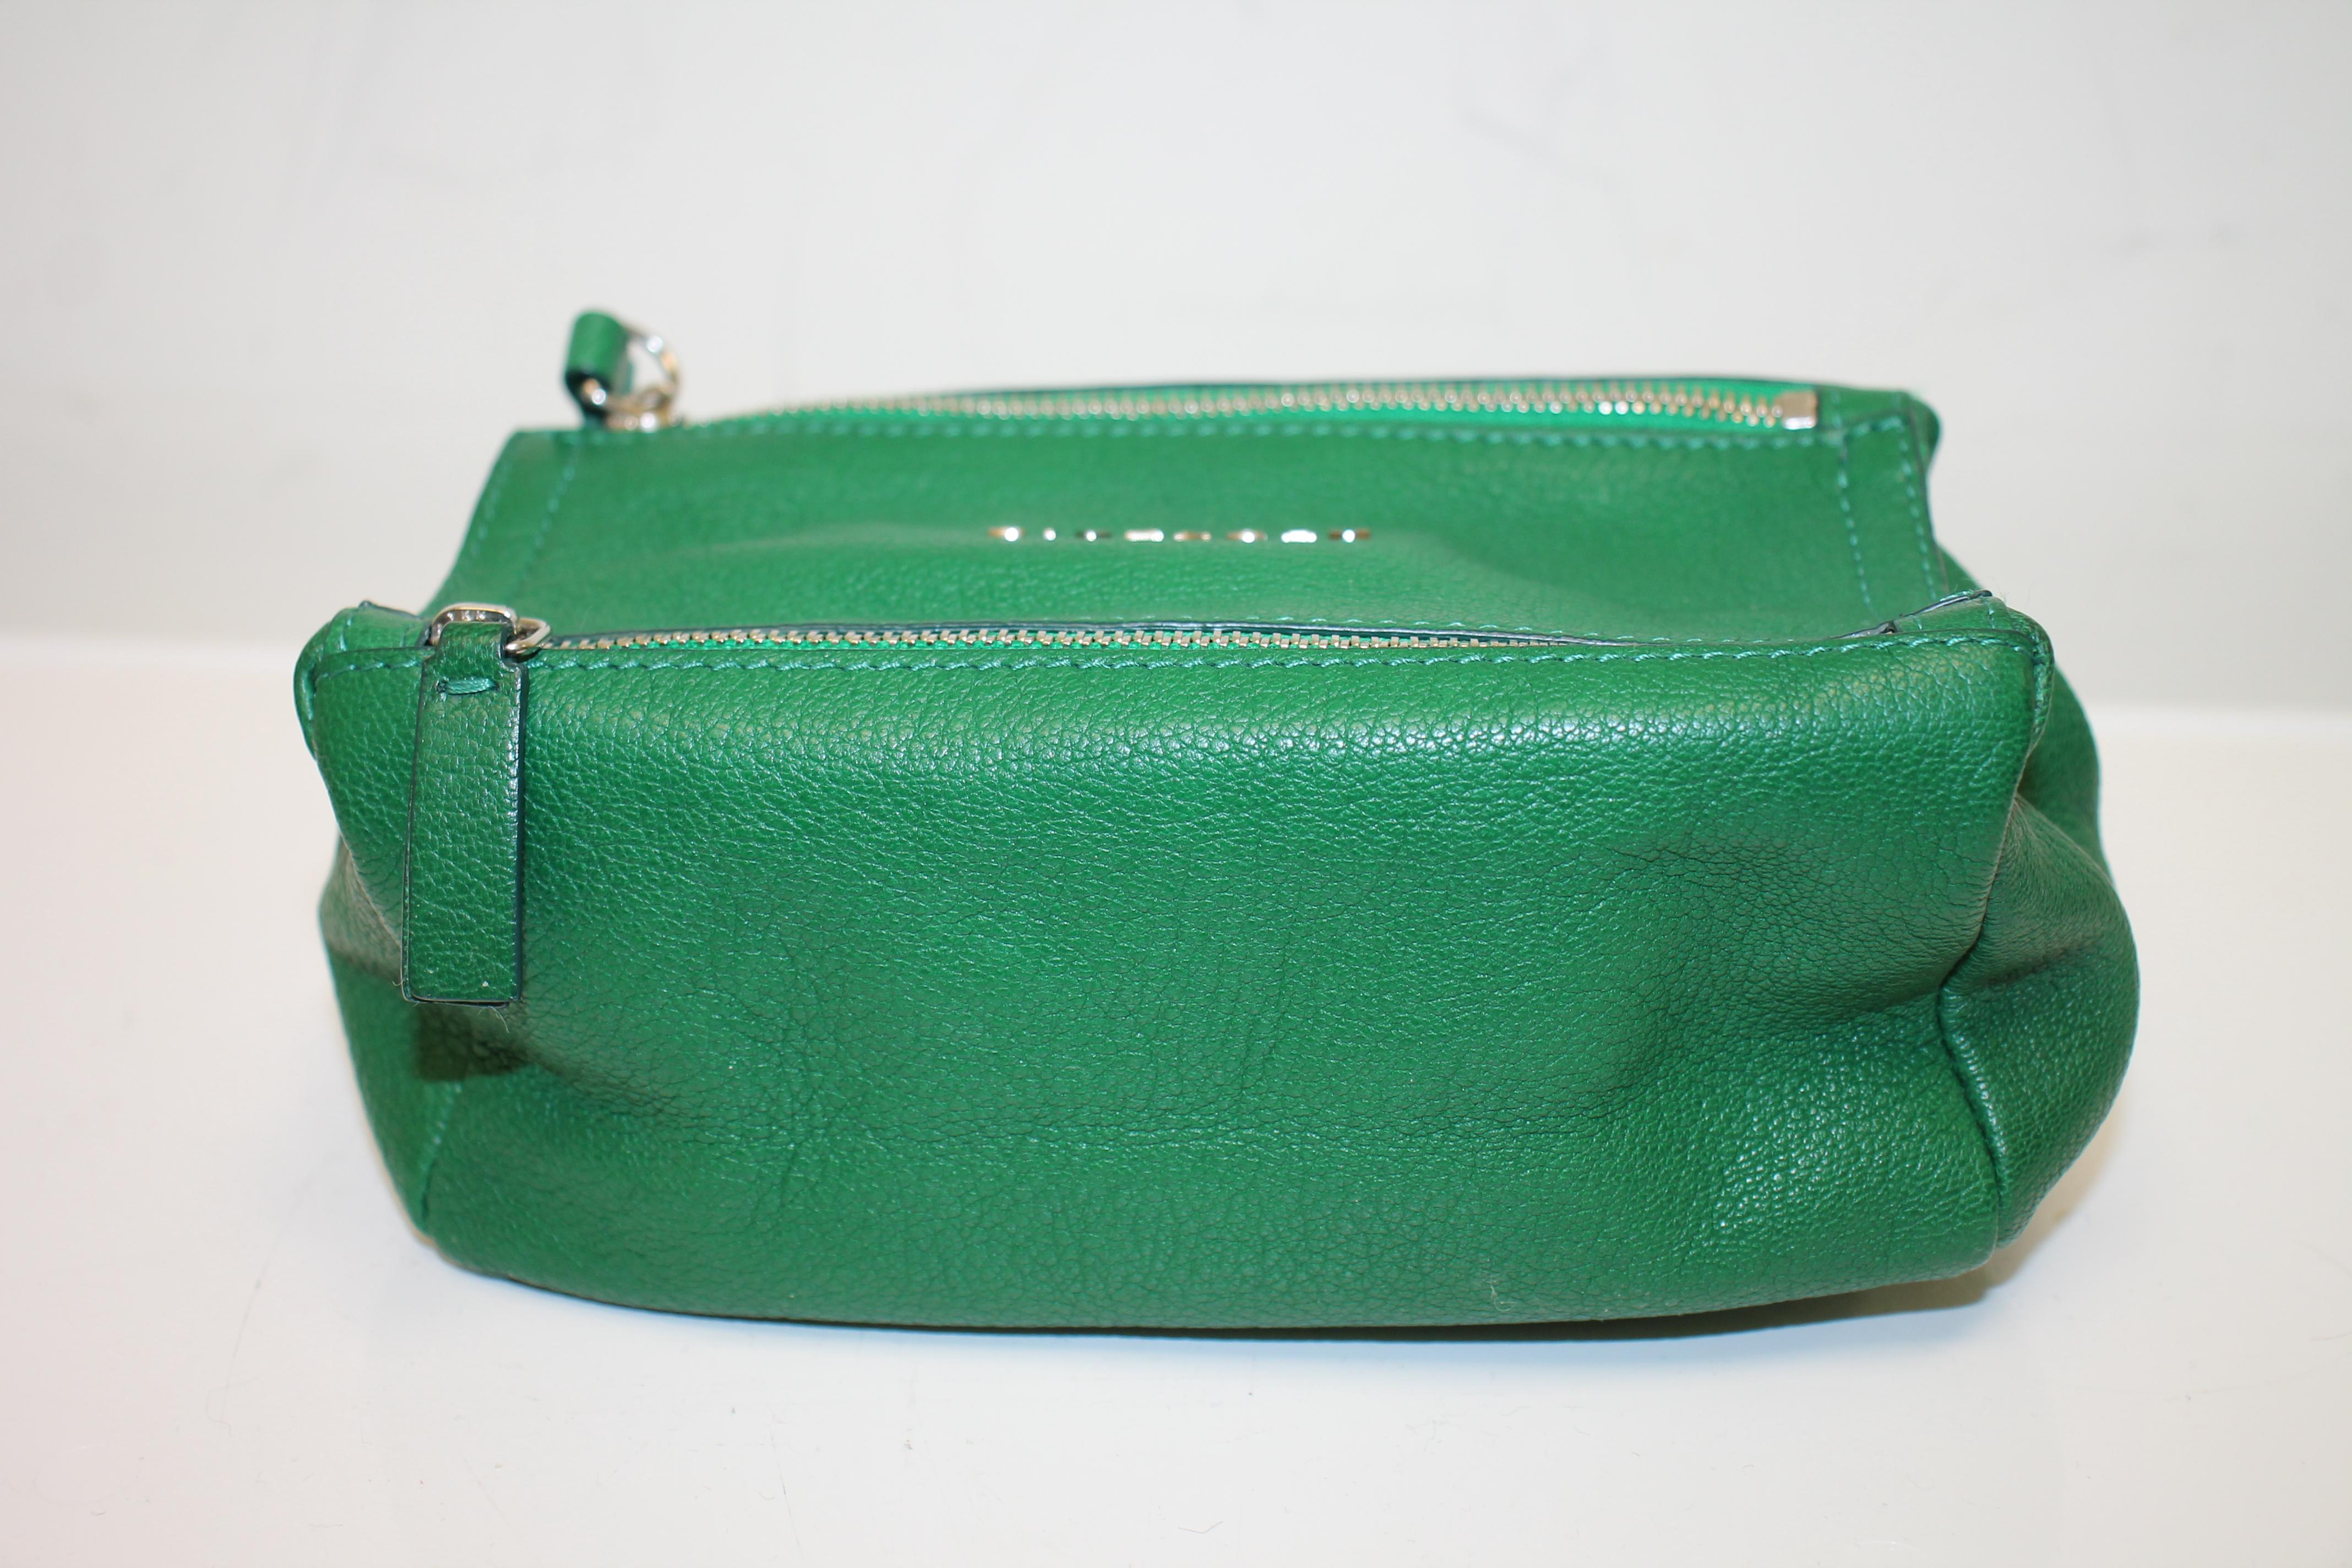 Bright green grained leather. Silver-tone hardware. Zip closure at top. Single flat wrist strap at side with chain-link accents. Logo adornment at front. Single exterior zip pocket at front. Beige canvas lining.